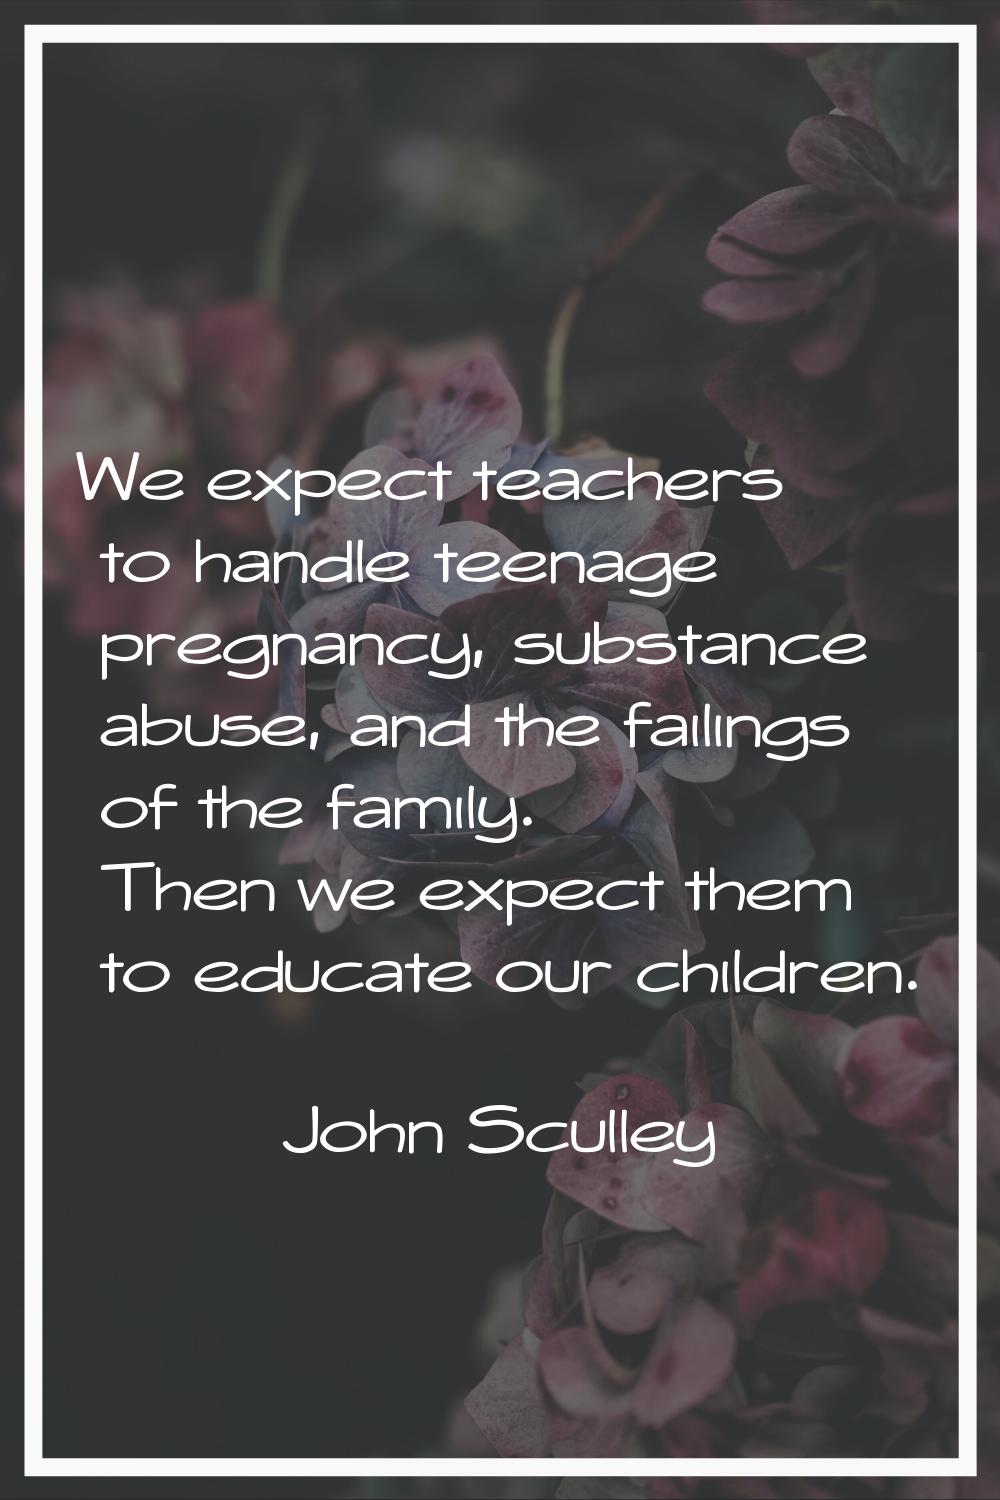 We expect teachers to handle teenage pregnancy, substance abuse, and the failings of the family. Th